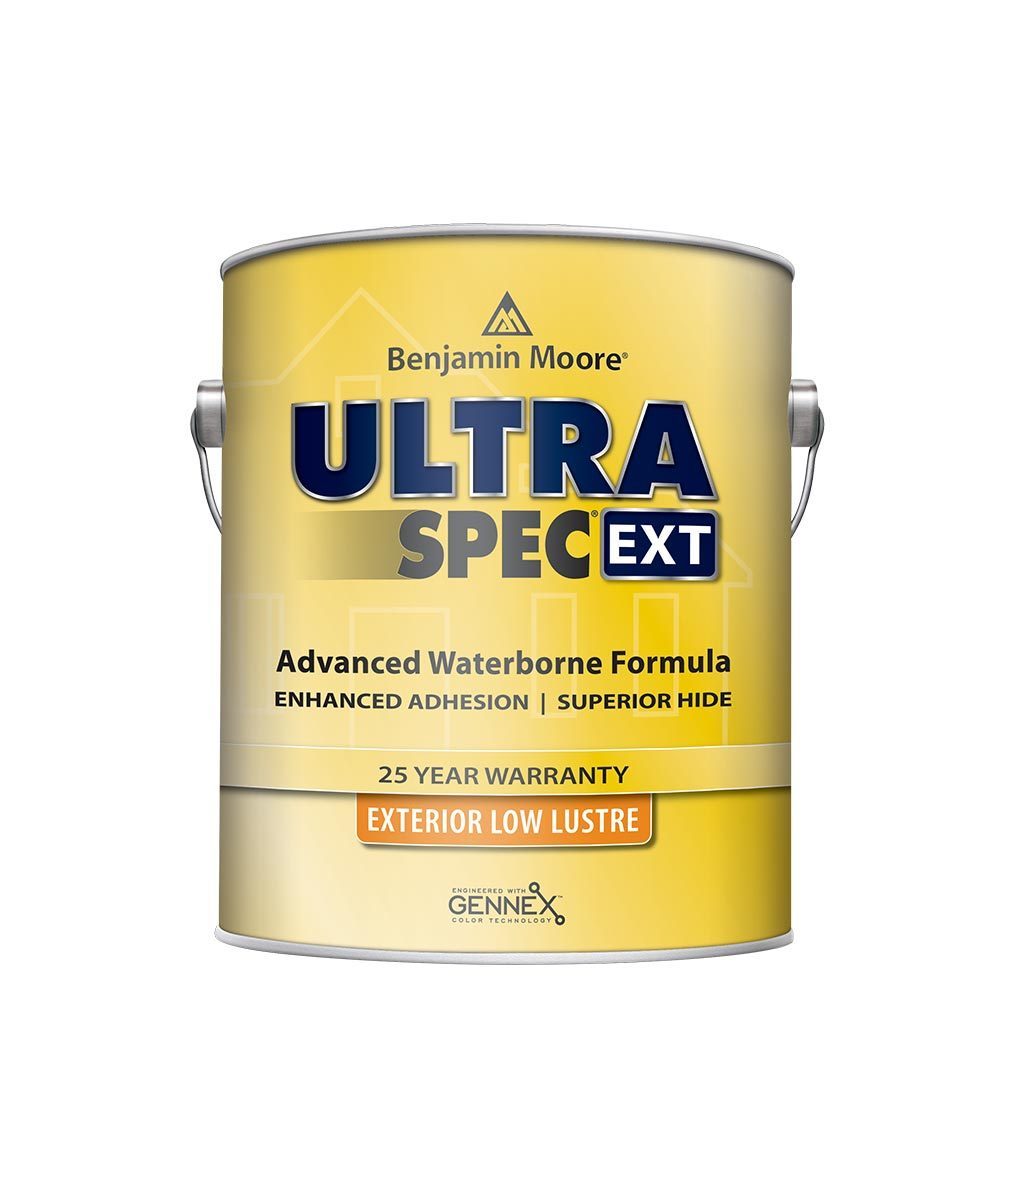 Benjamin Moore Ultra Spec EXT exterior paint in satin finish available at JC Licht